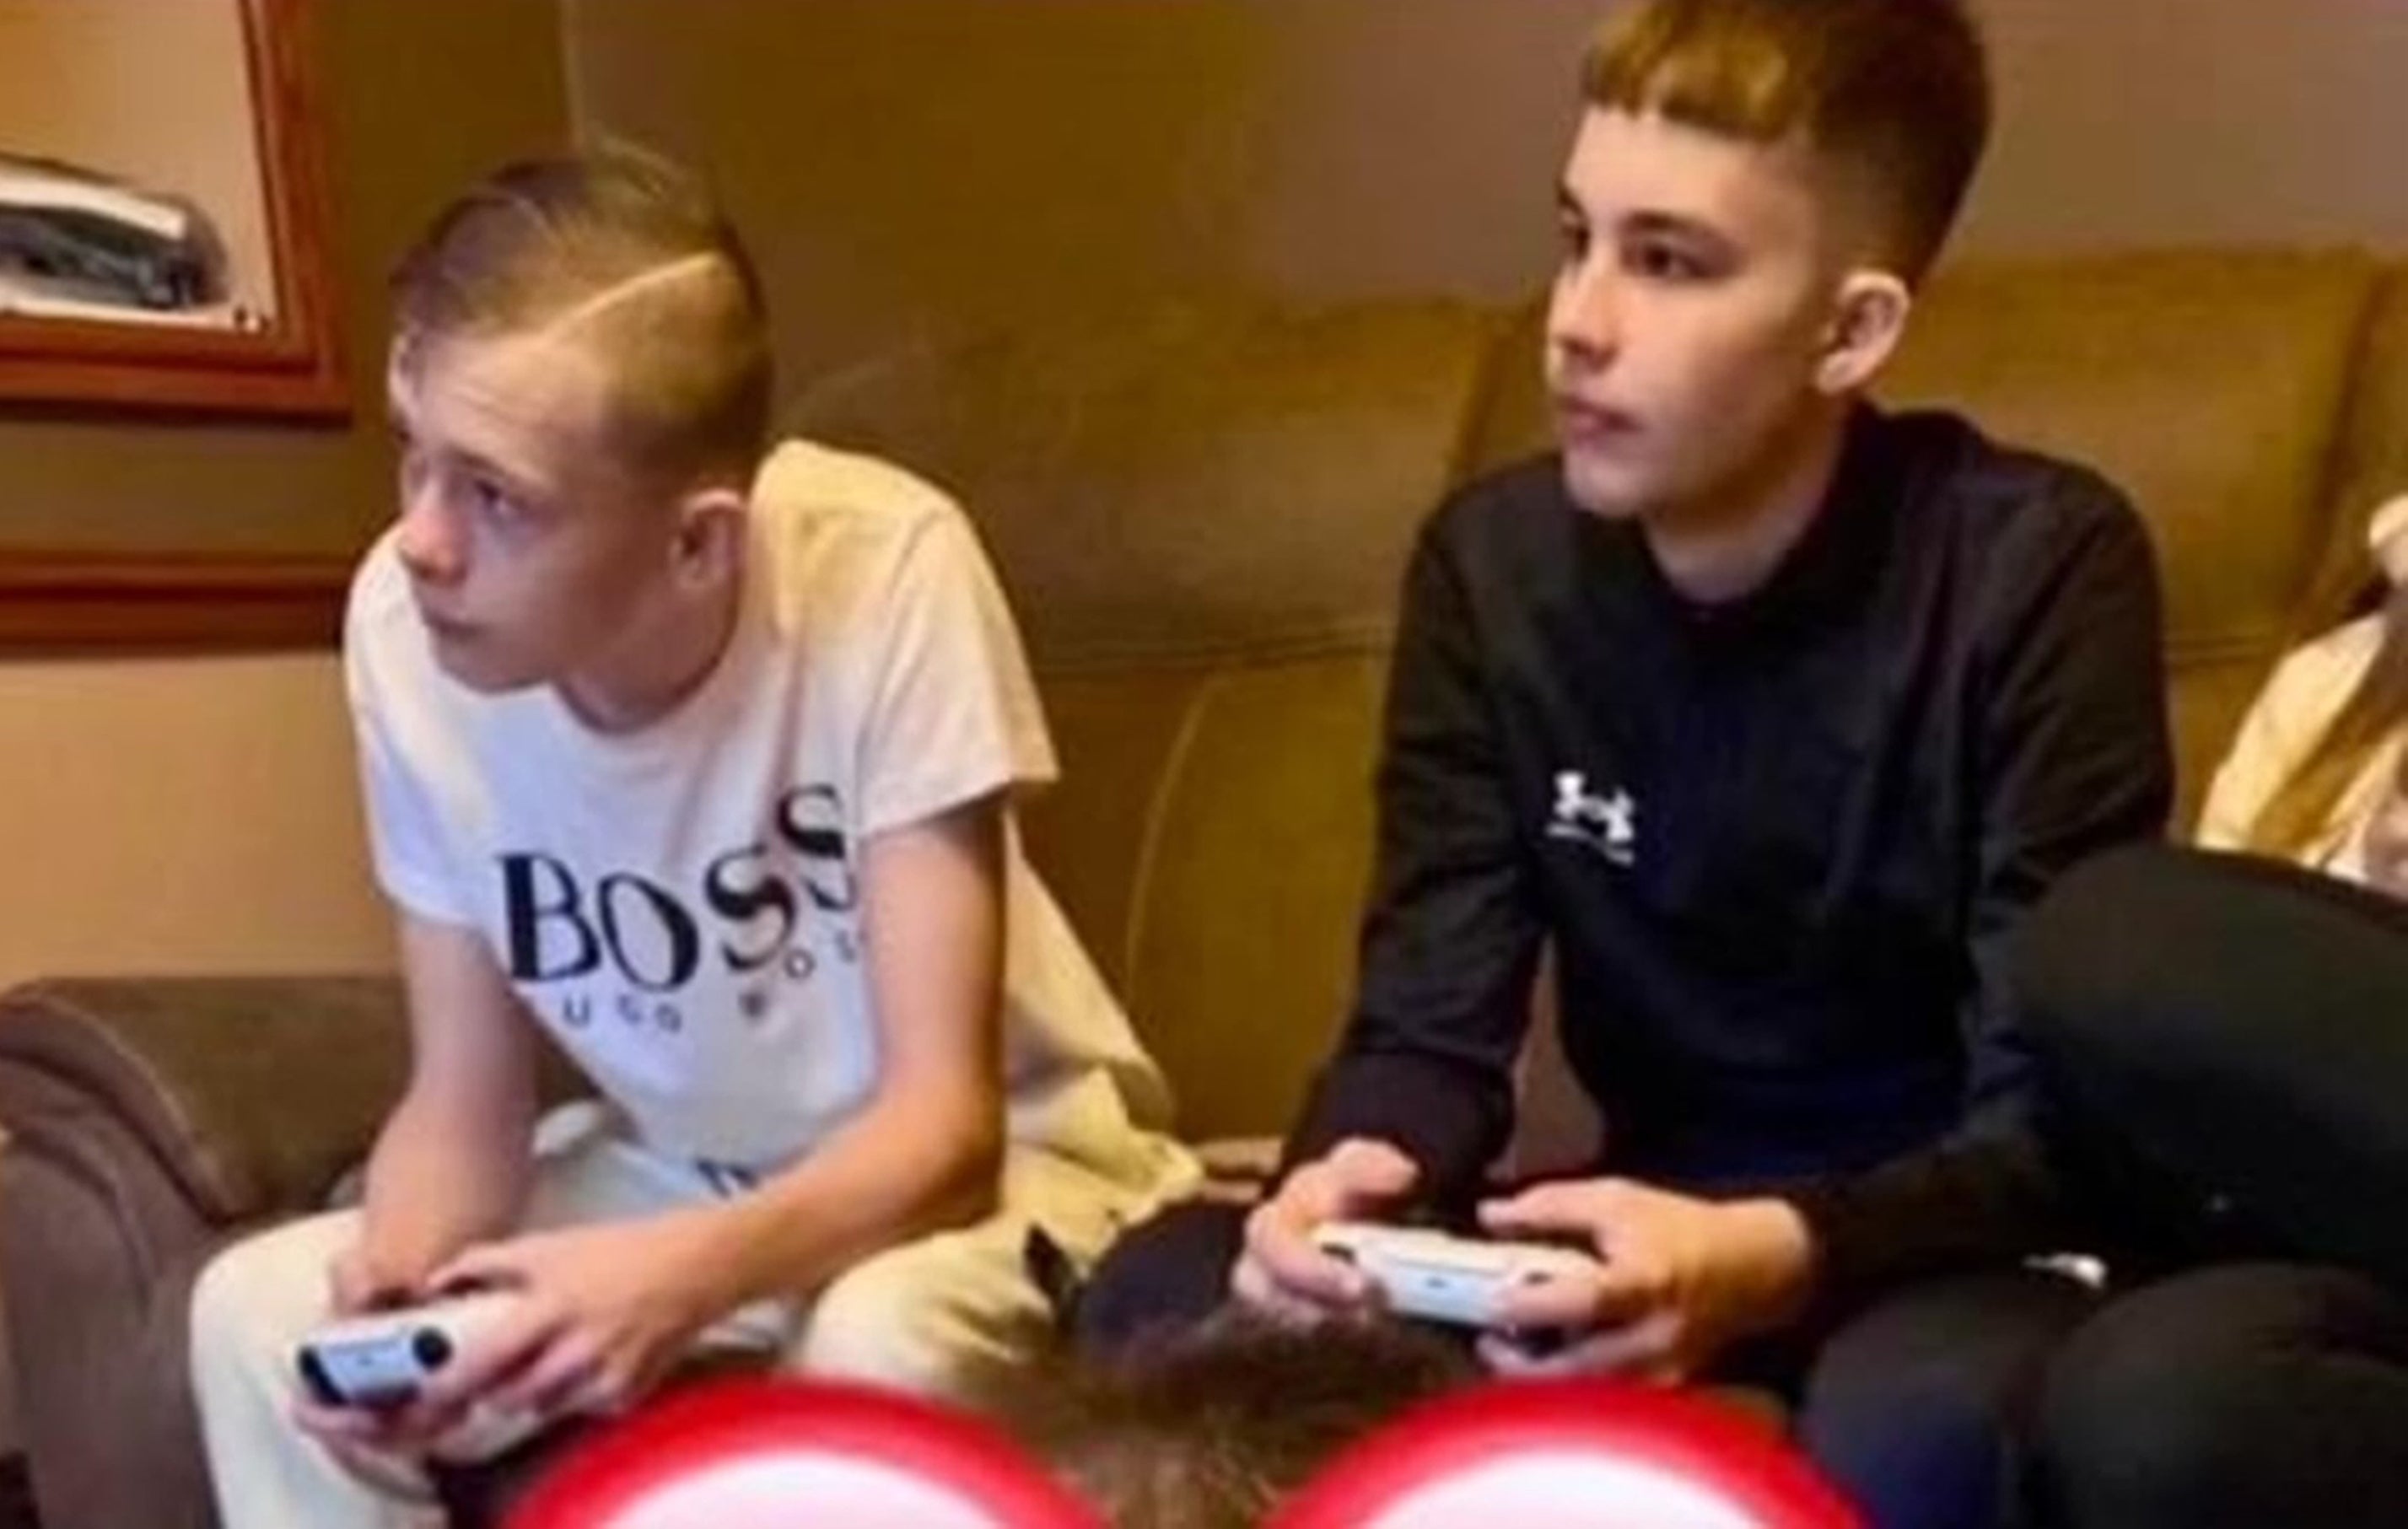 Mason Rist (15, left) and Max Dixon (16) were killed in a knife attack in Bristol in January. Campaigners say stronger punishments need to be given to stop young people from carrying knifes